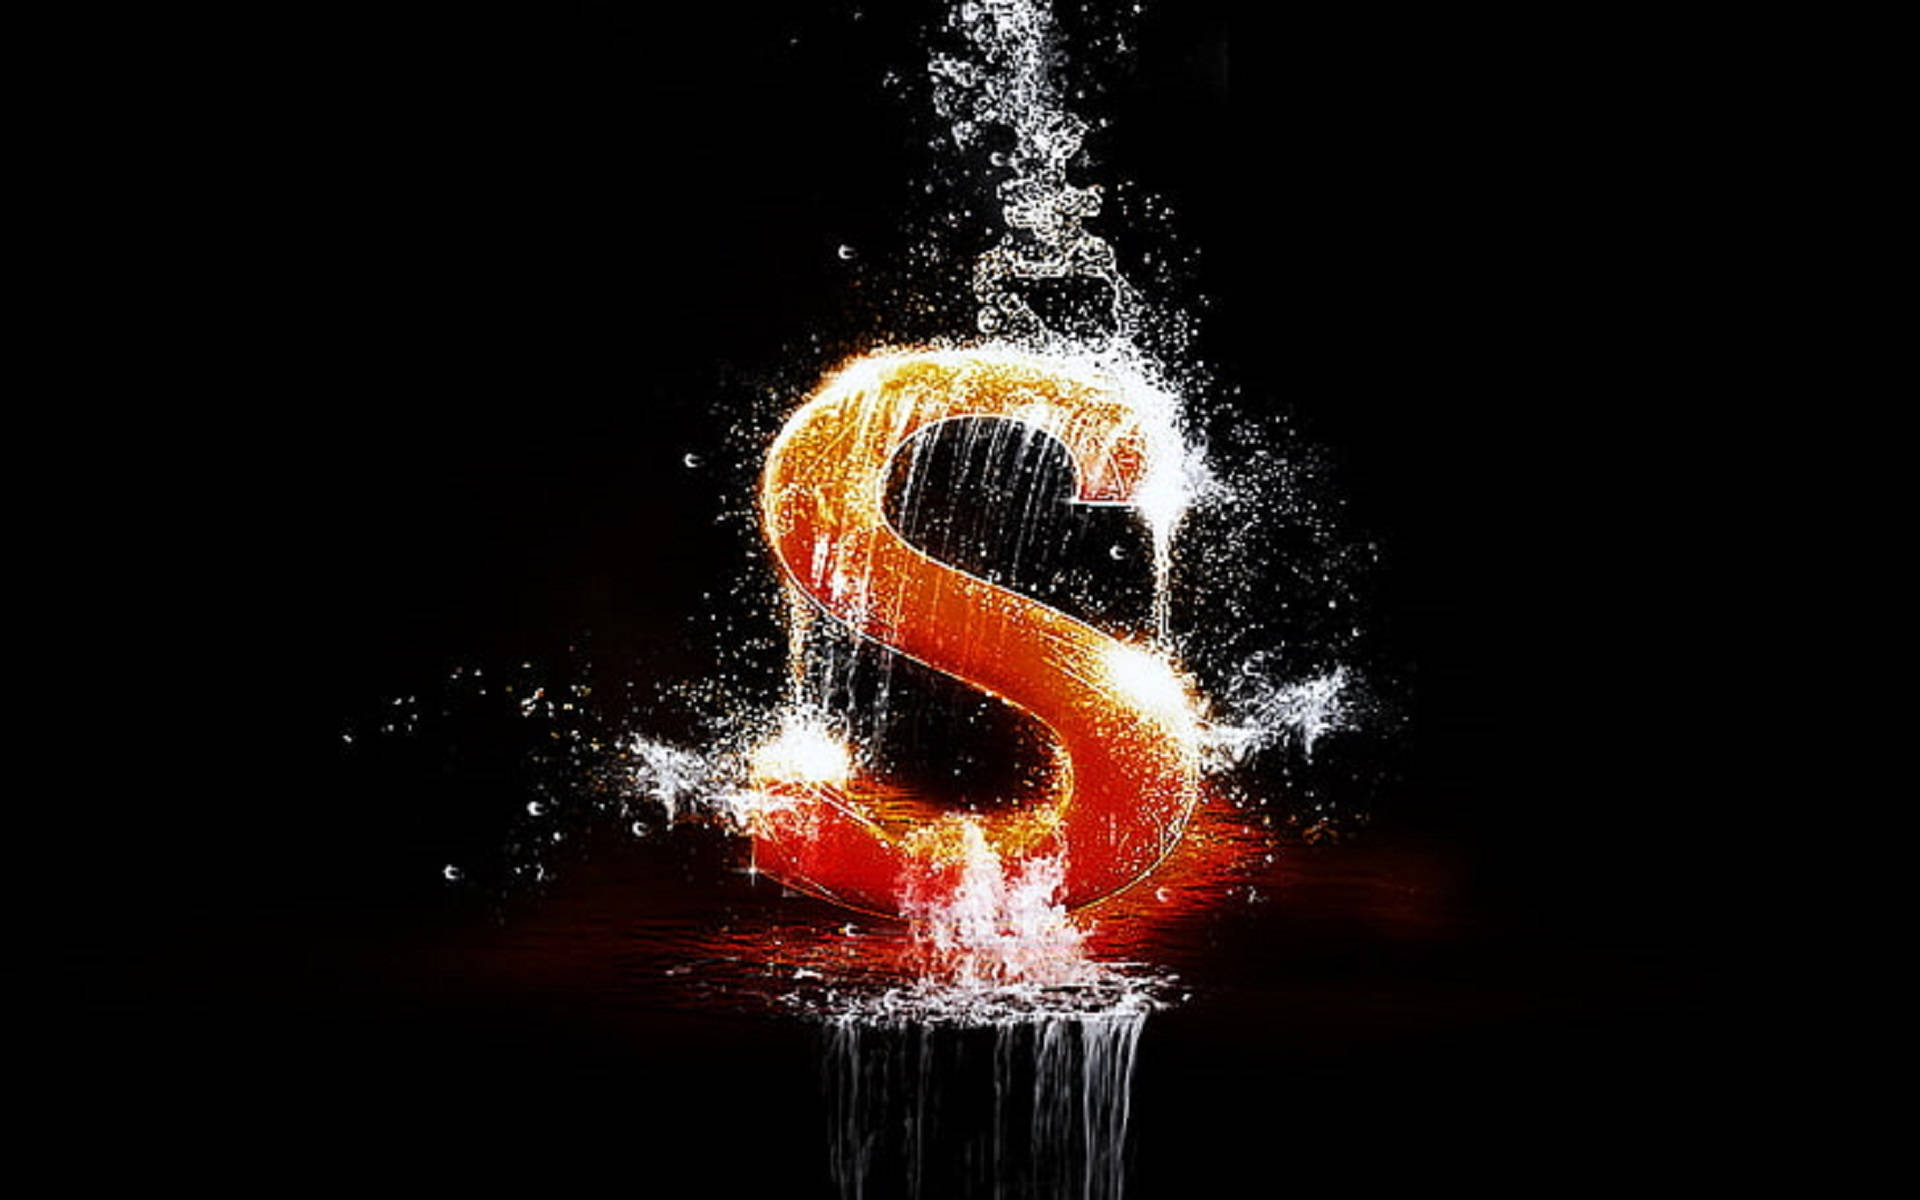 Letter S With Water Effects Wallpaper